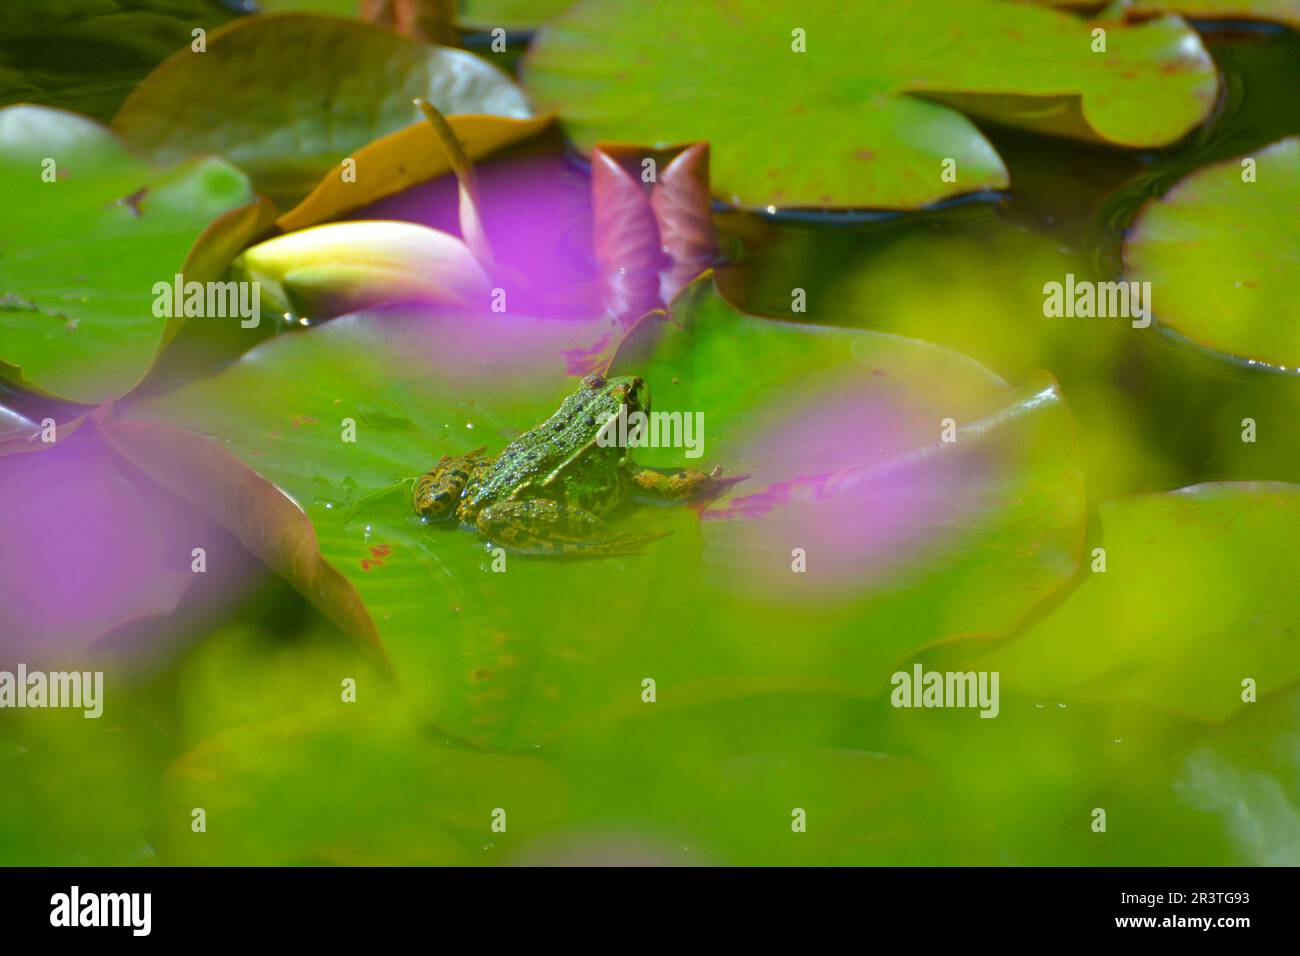 Water frog sitting on lily pad in garden pond Stock Photo